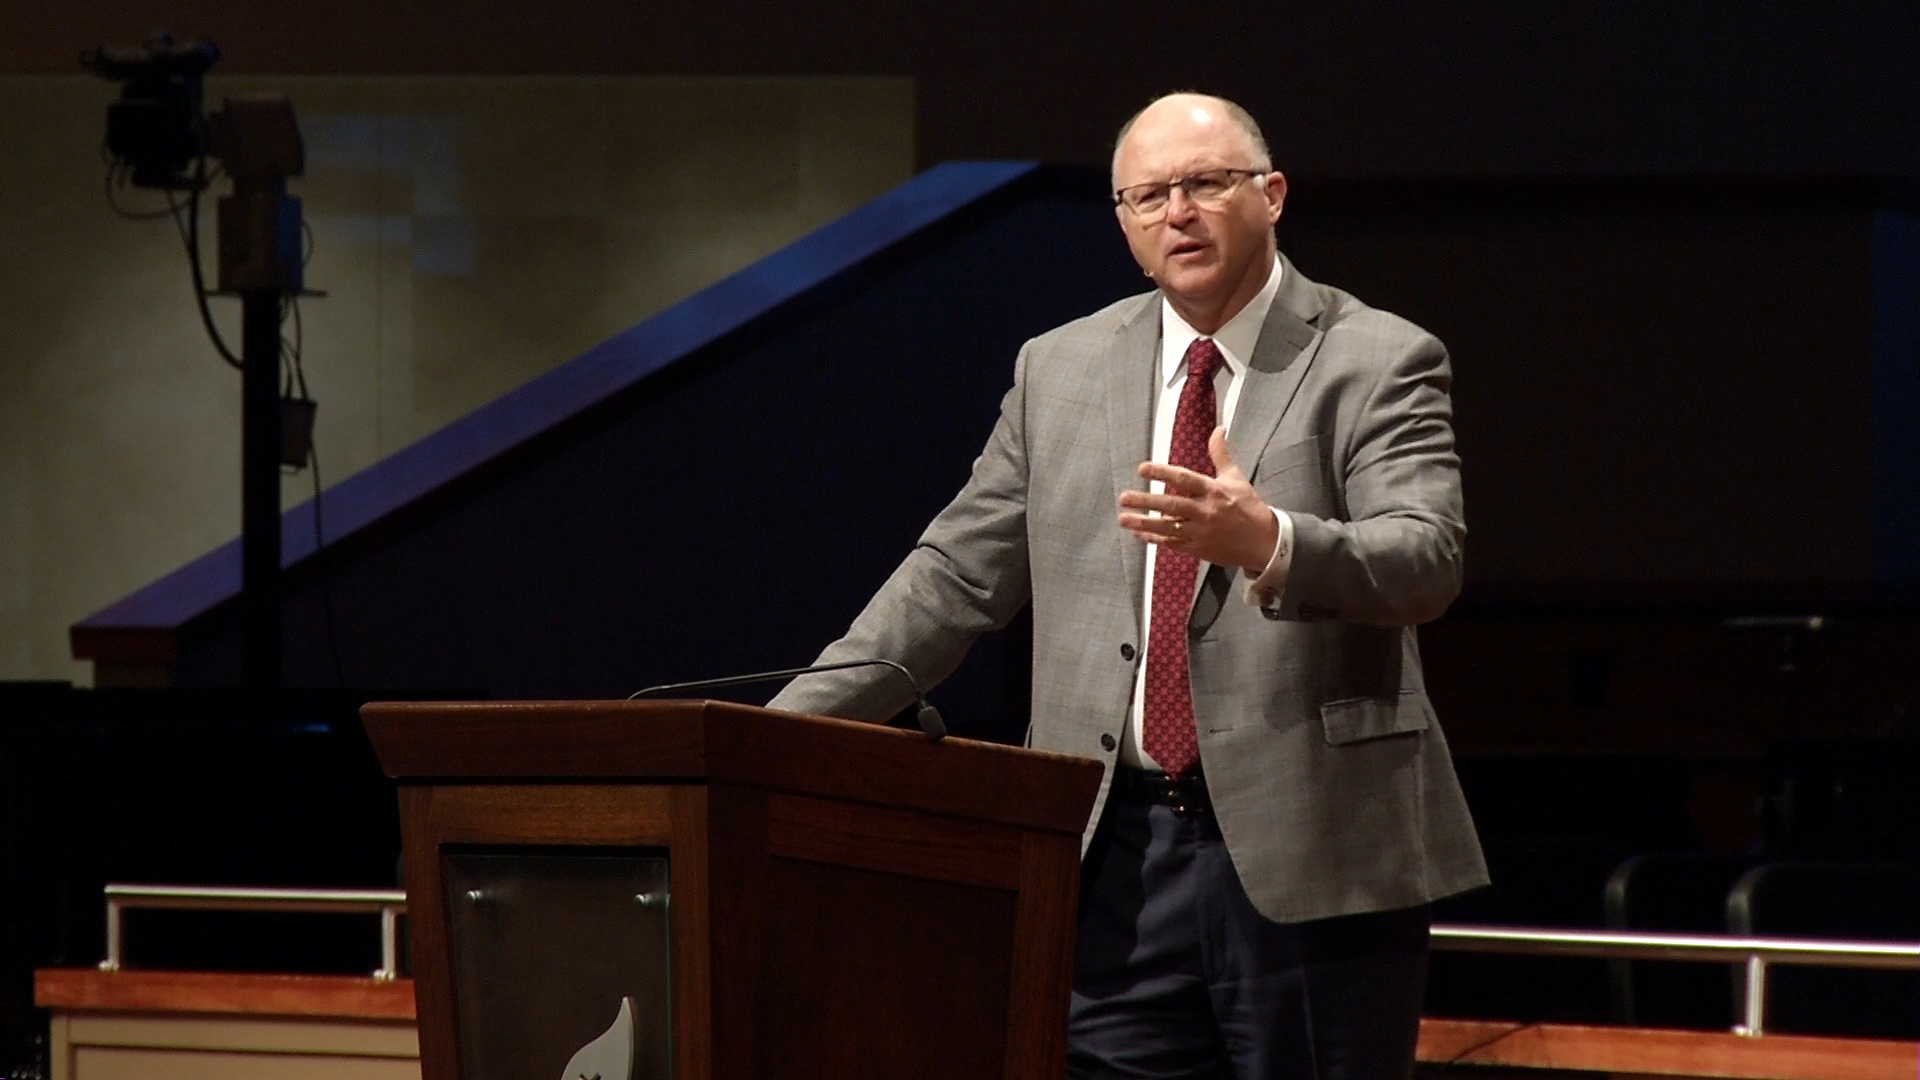 Pastor Paul Chappell: Are You Growing?